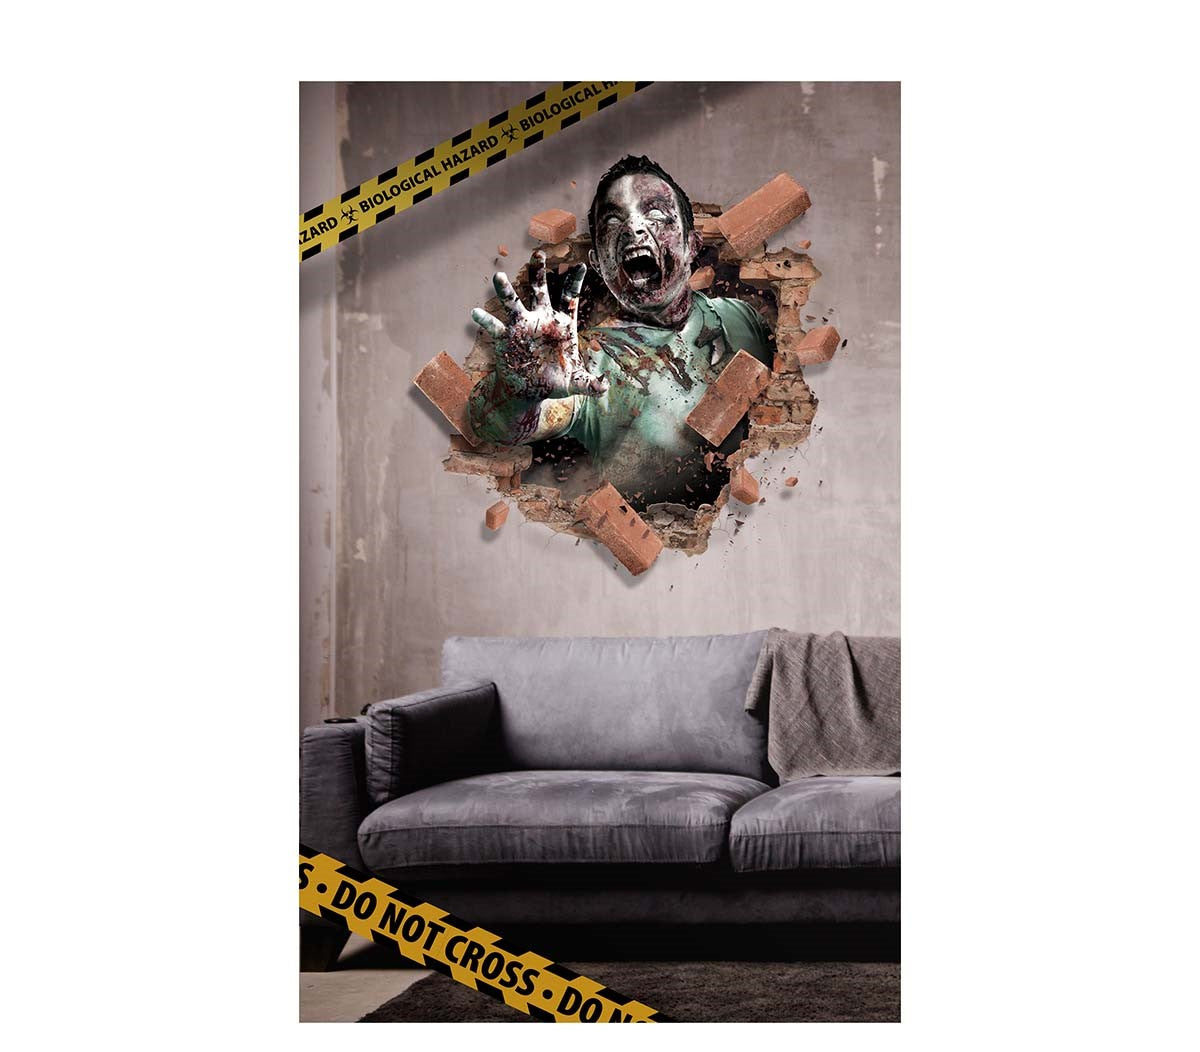 Adhesive 3D Foil Zombie Wall Decor